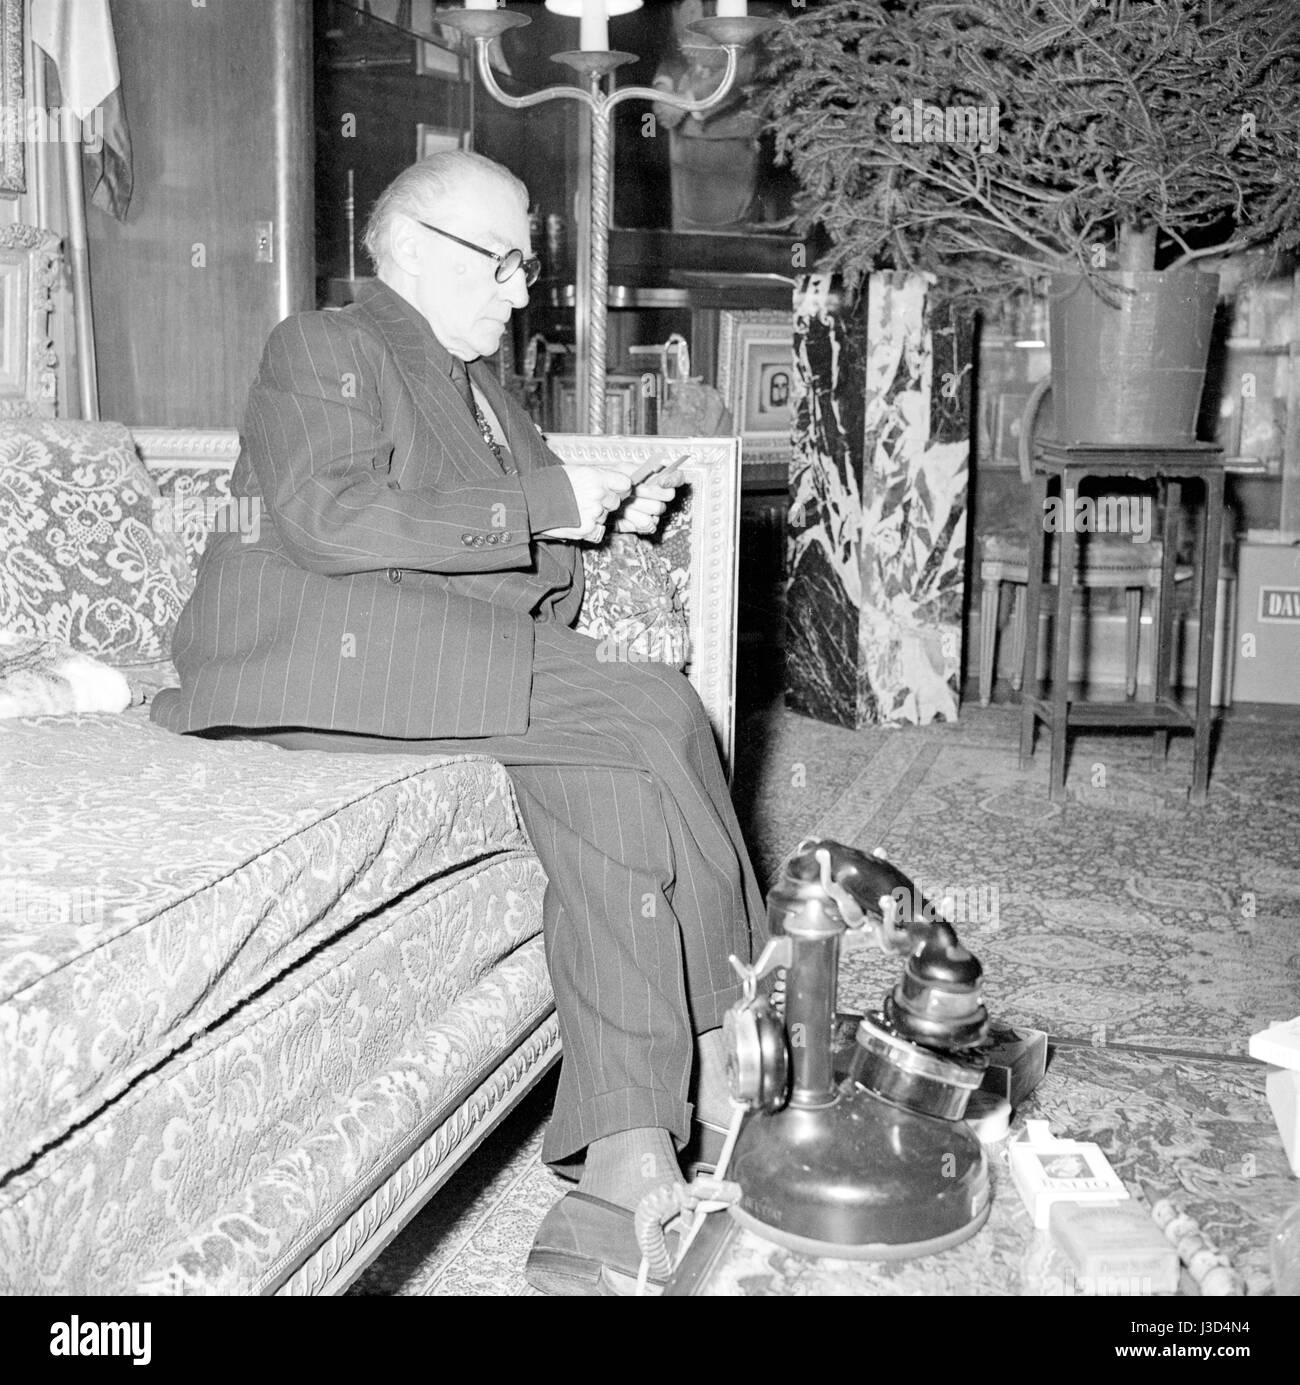 French actor, playwright and director Sacha Guitry in the living room of his Paris apartment located 18 avenue Elisée Reclus. c.1955 Photo Georges Rétif de la Bretonne Stock Photo